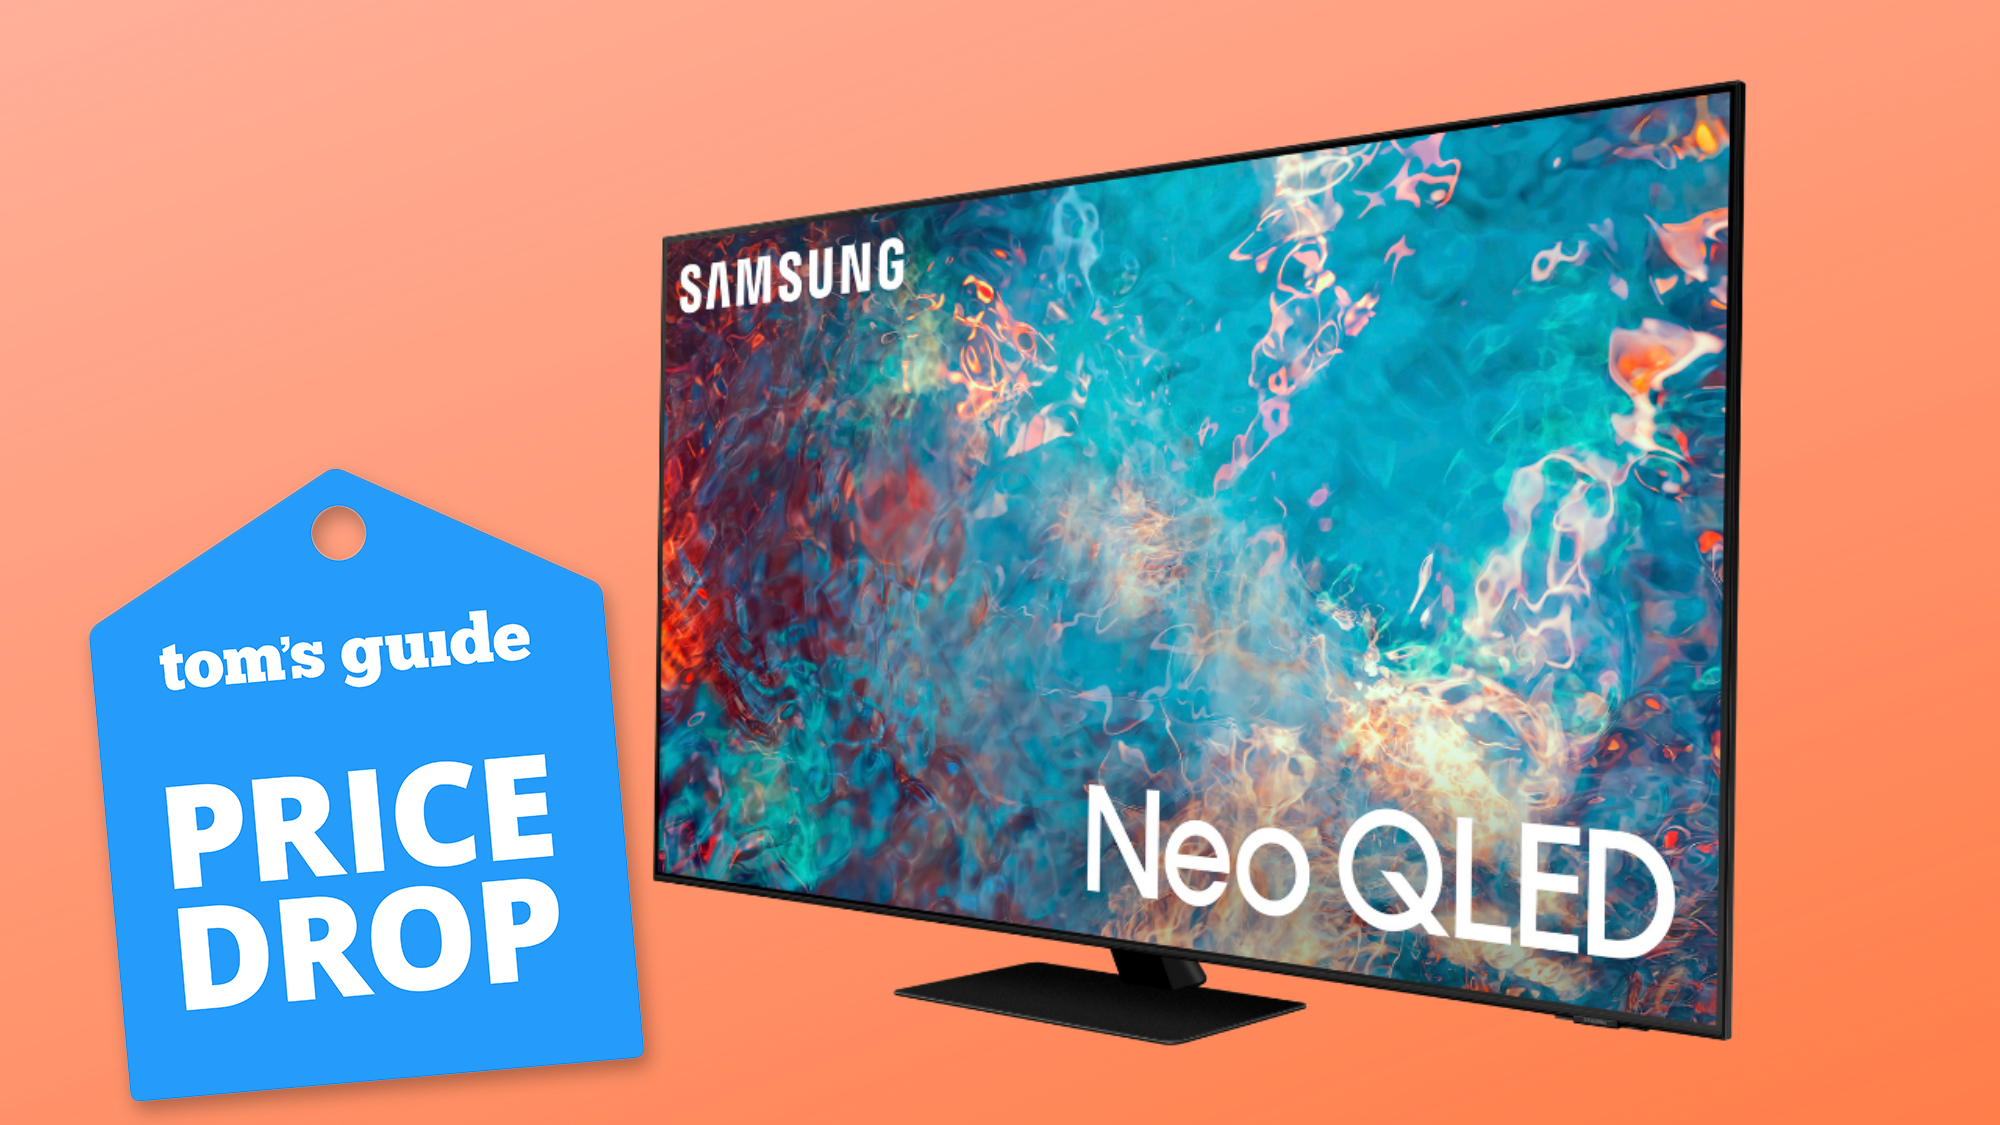 Image showing a 75-inch Neo QLED Samsung TV